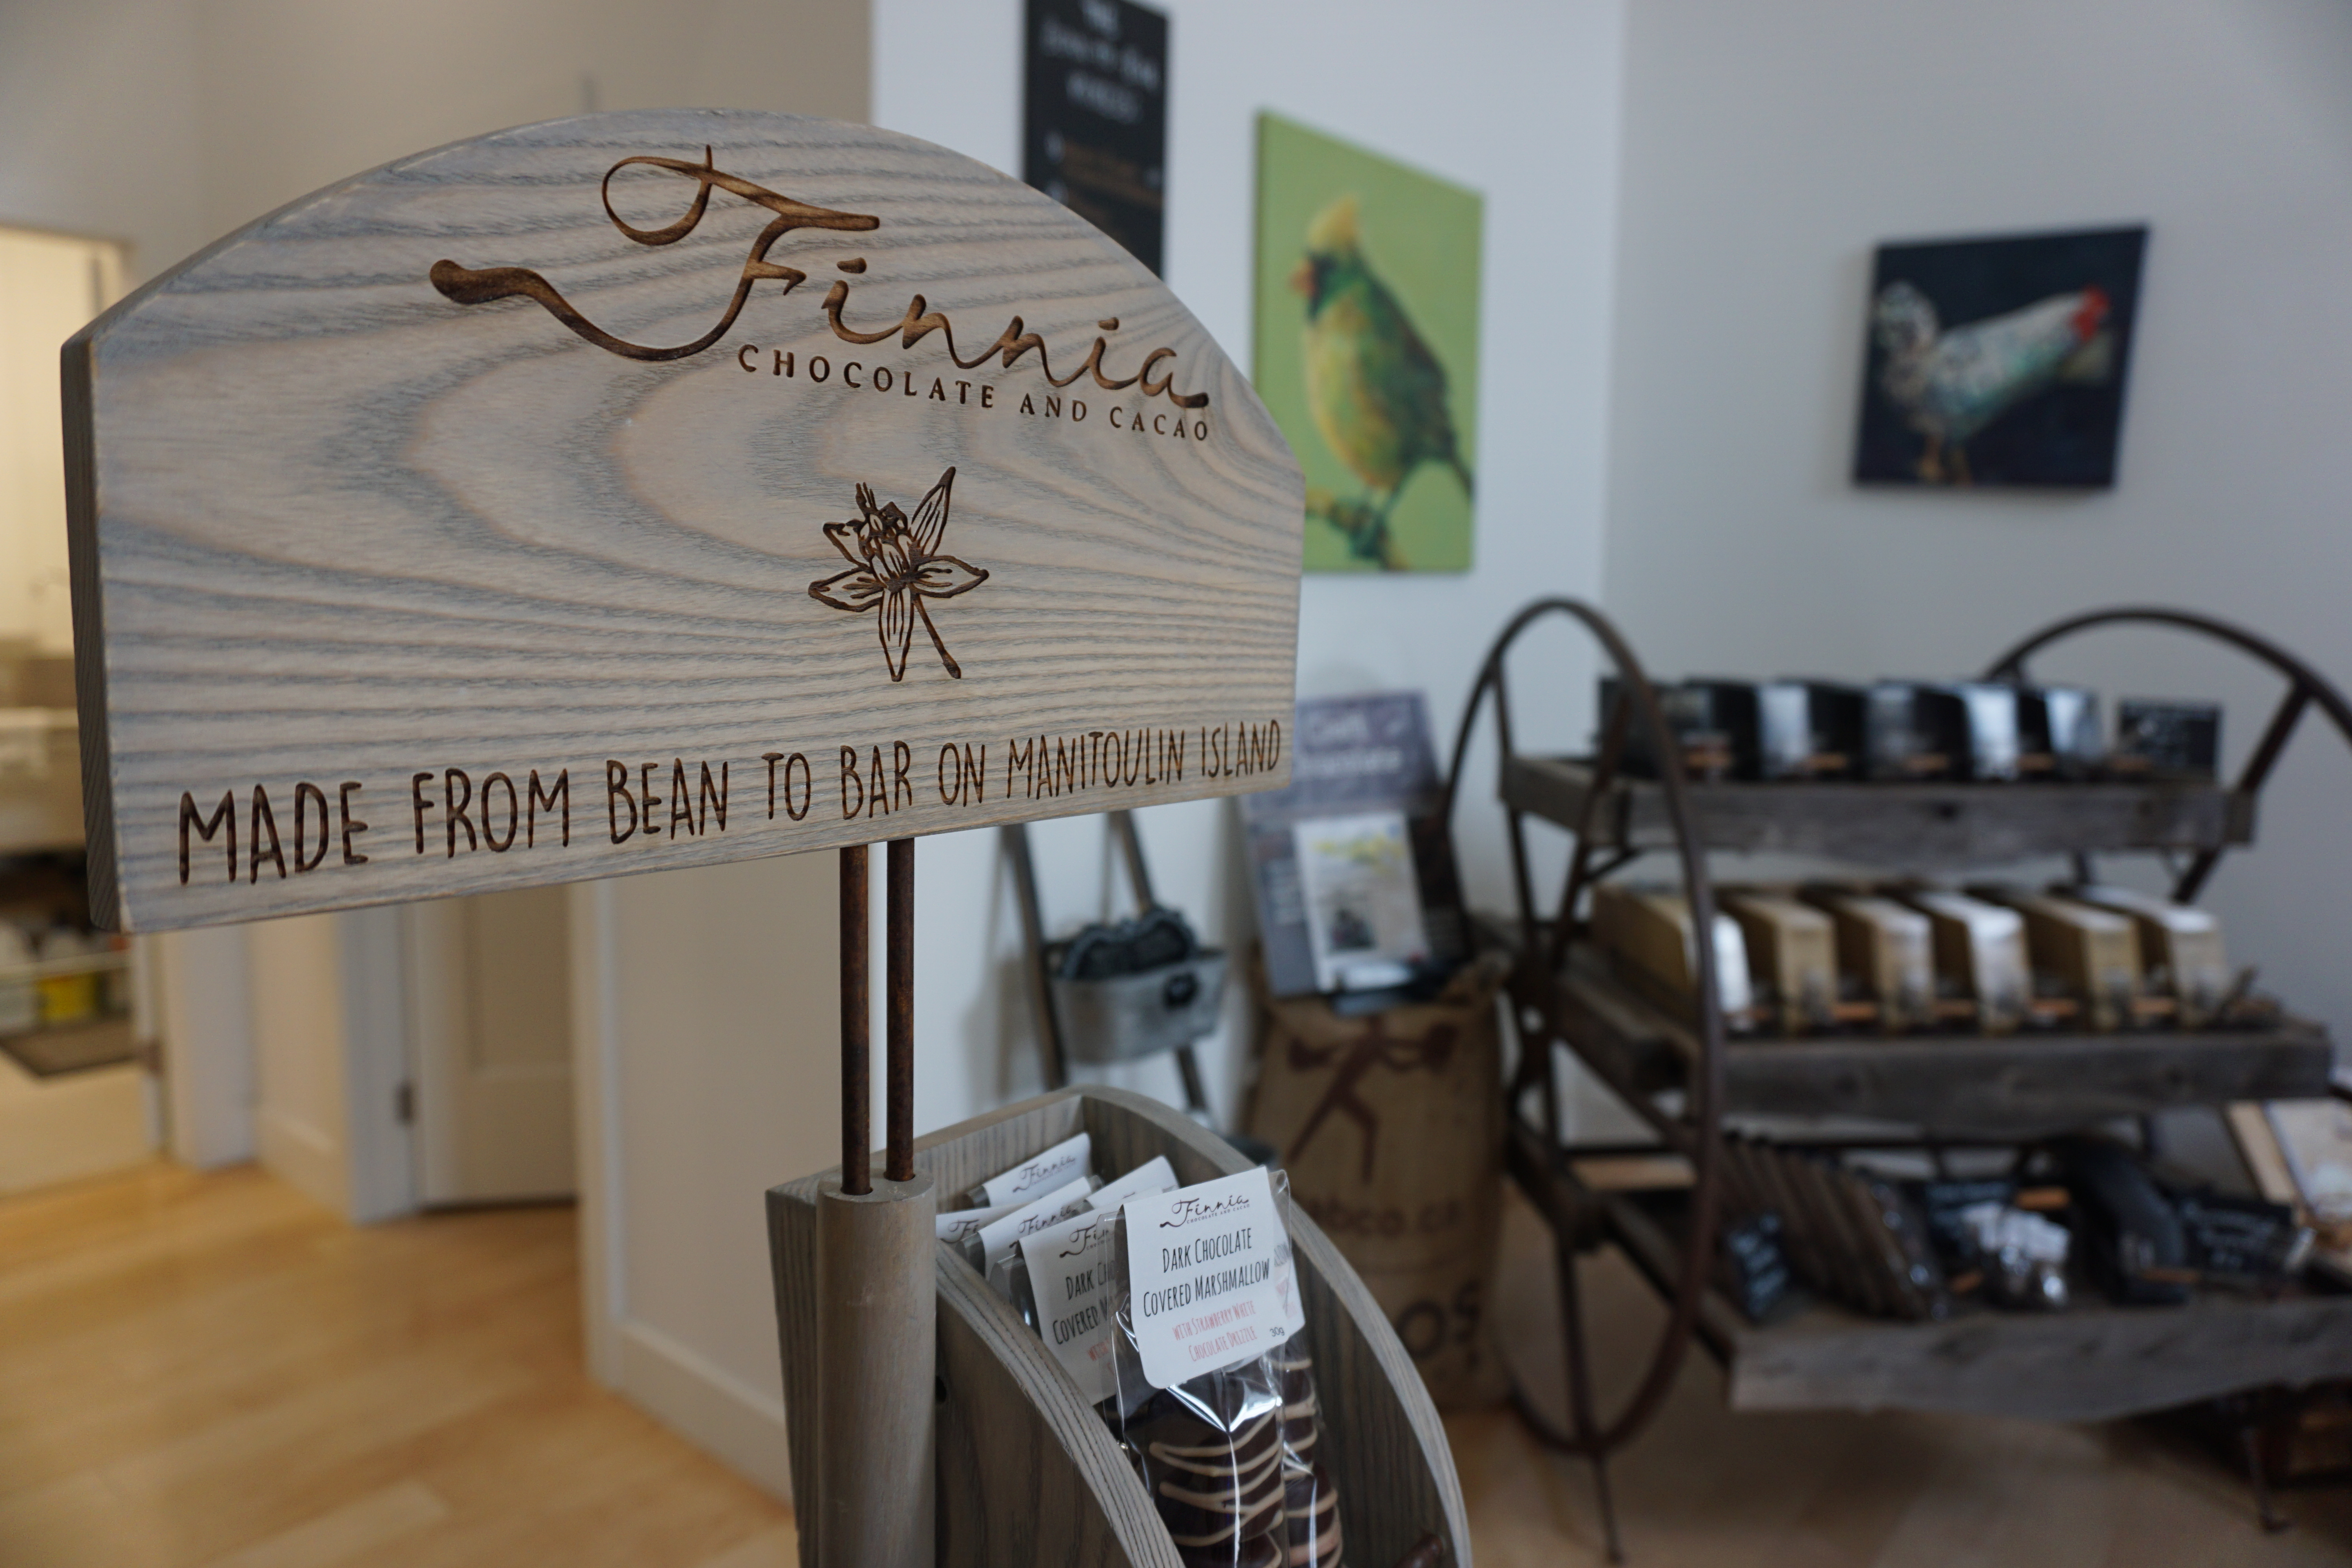 a wooden sign over gourmet chocolate bars that reads "Finnia chocolate and cacao: made from bean to bar on Manitoulin Island".